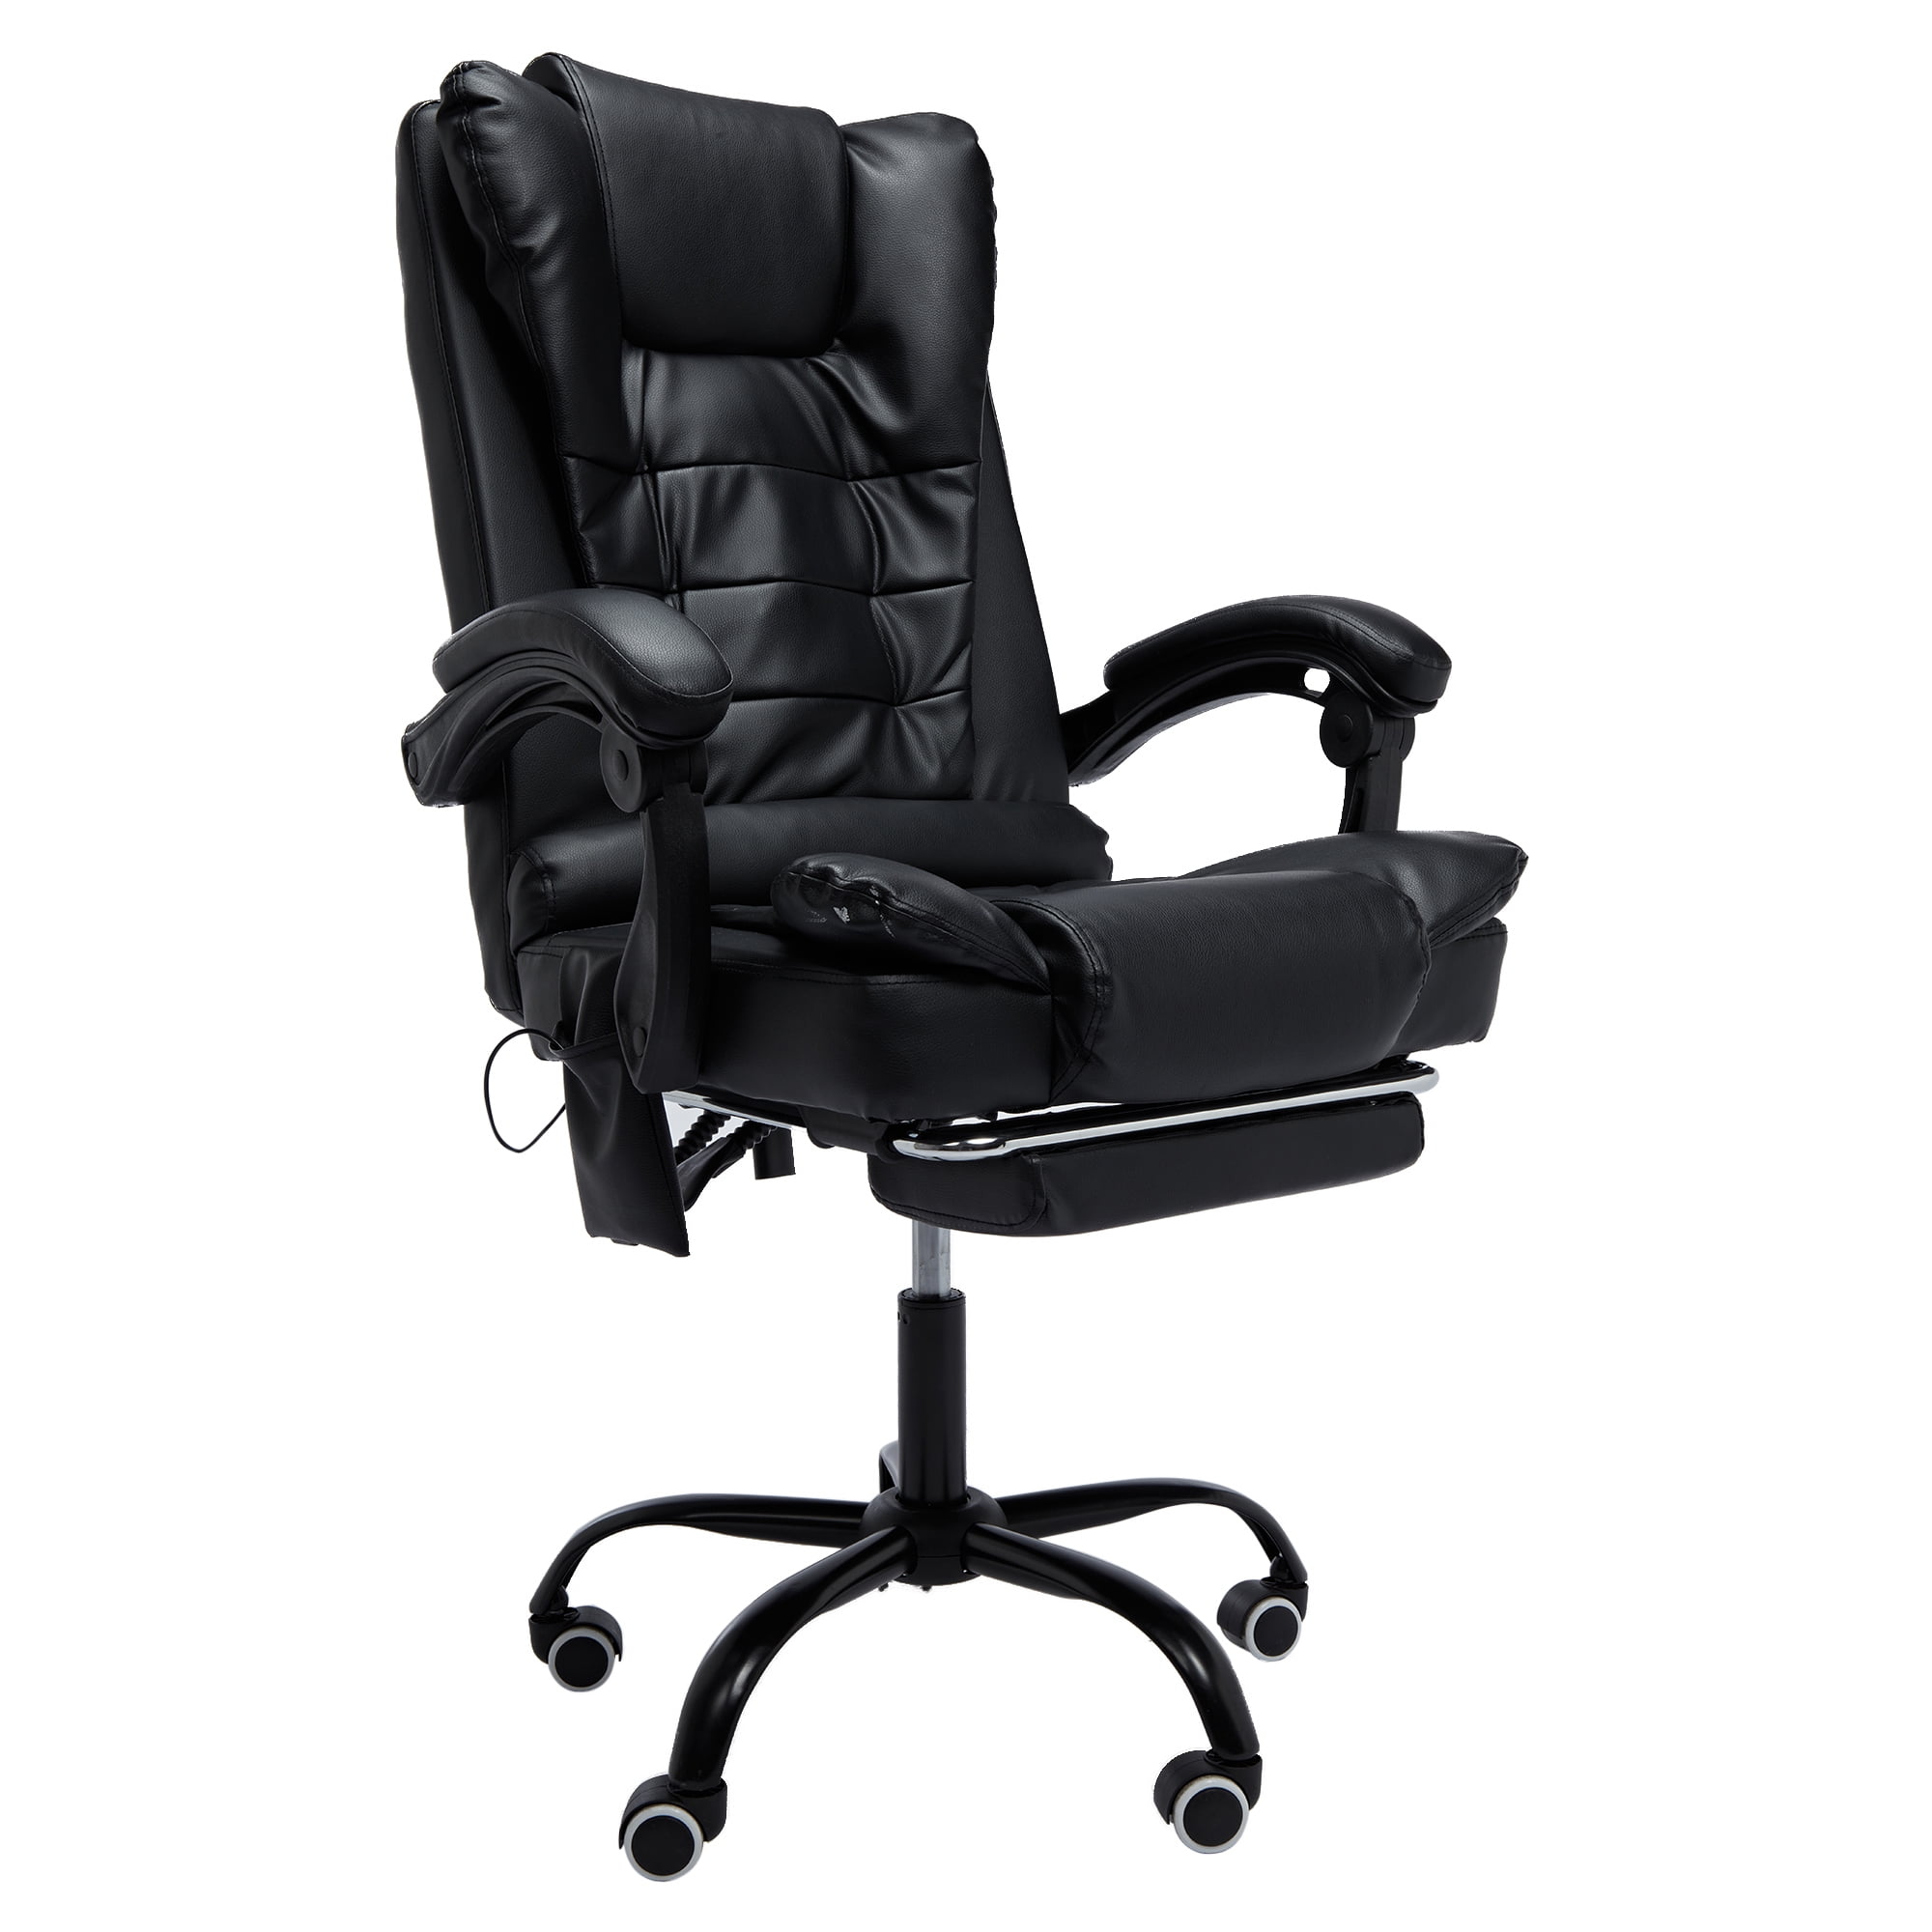 Luxury Computer Chair Gaming Chair Swivel Recliner Executive Home Office Chair 